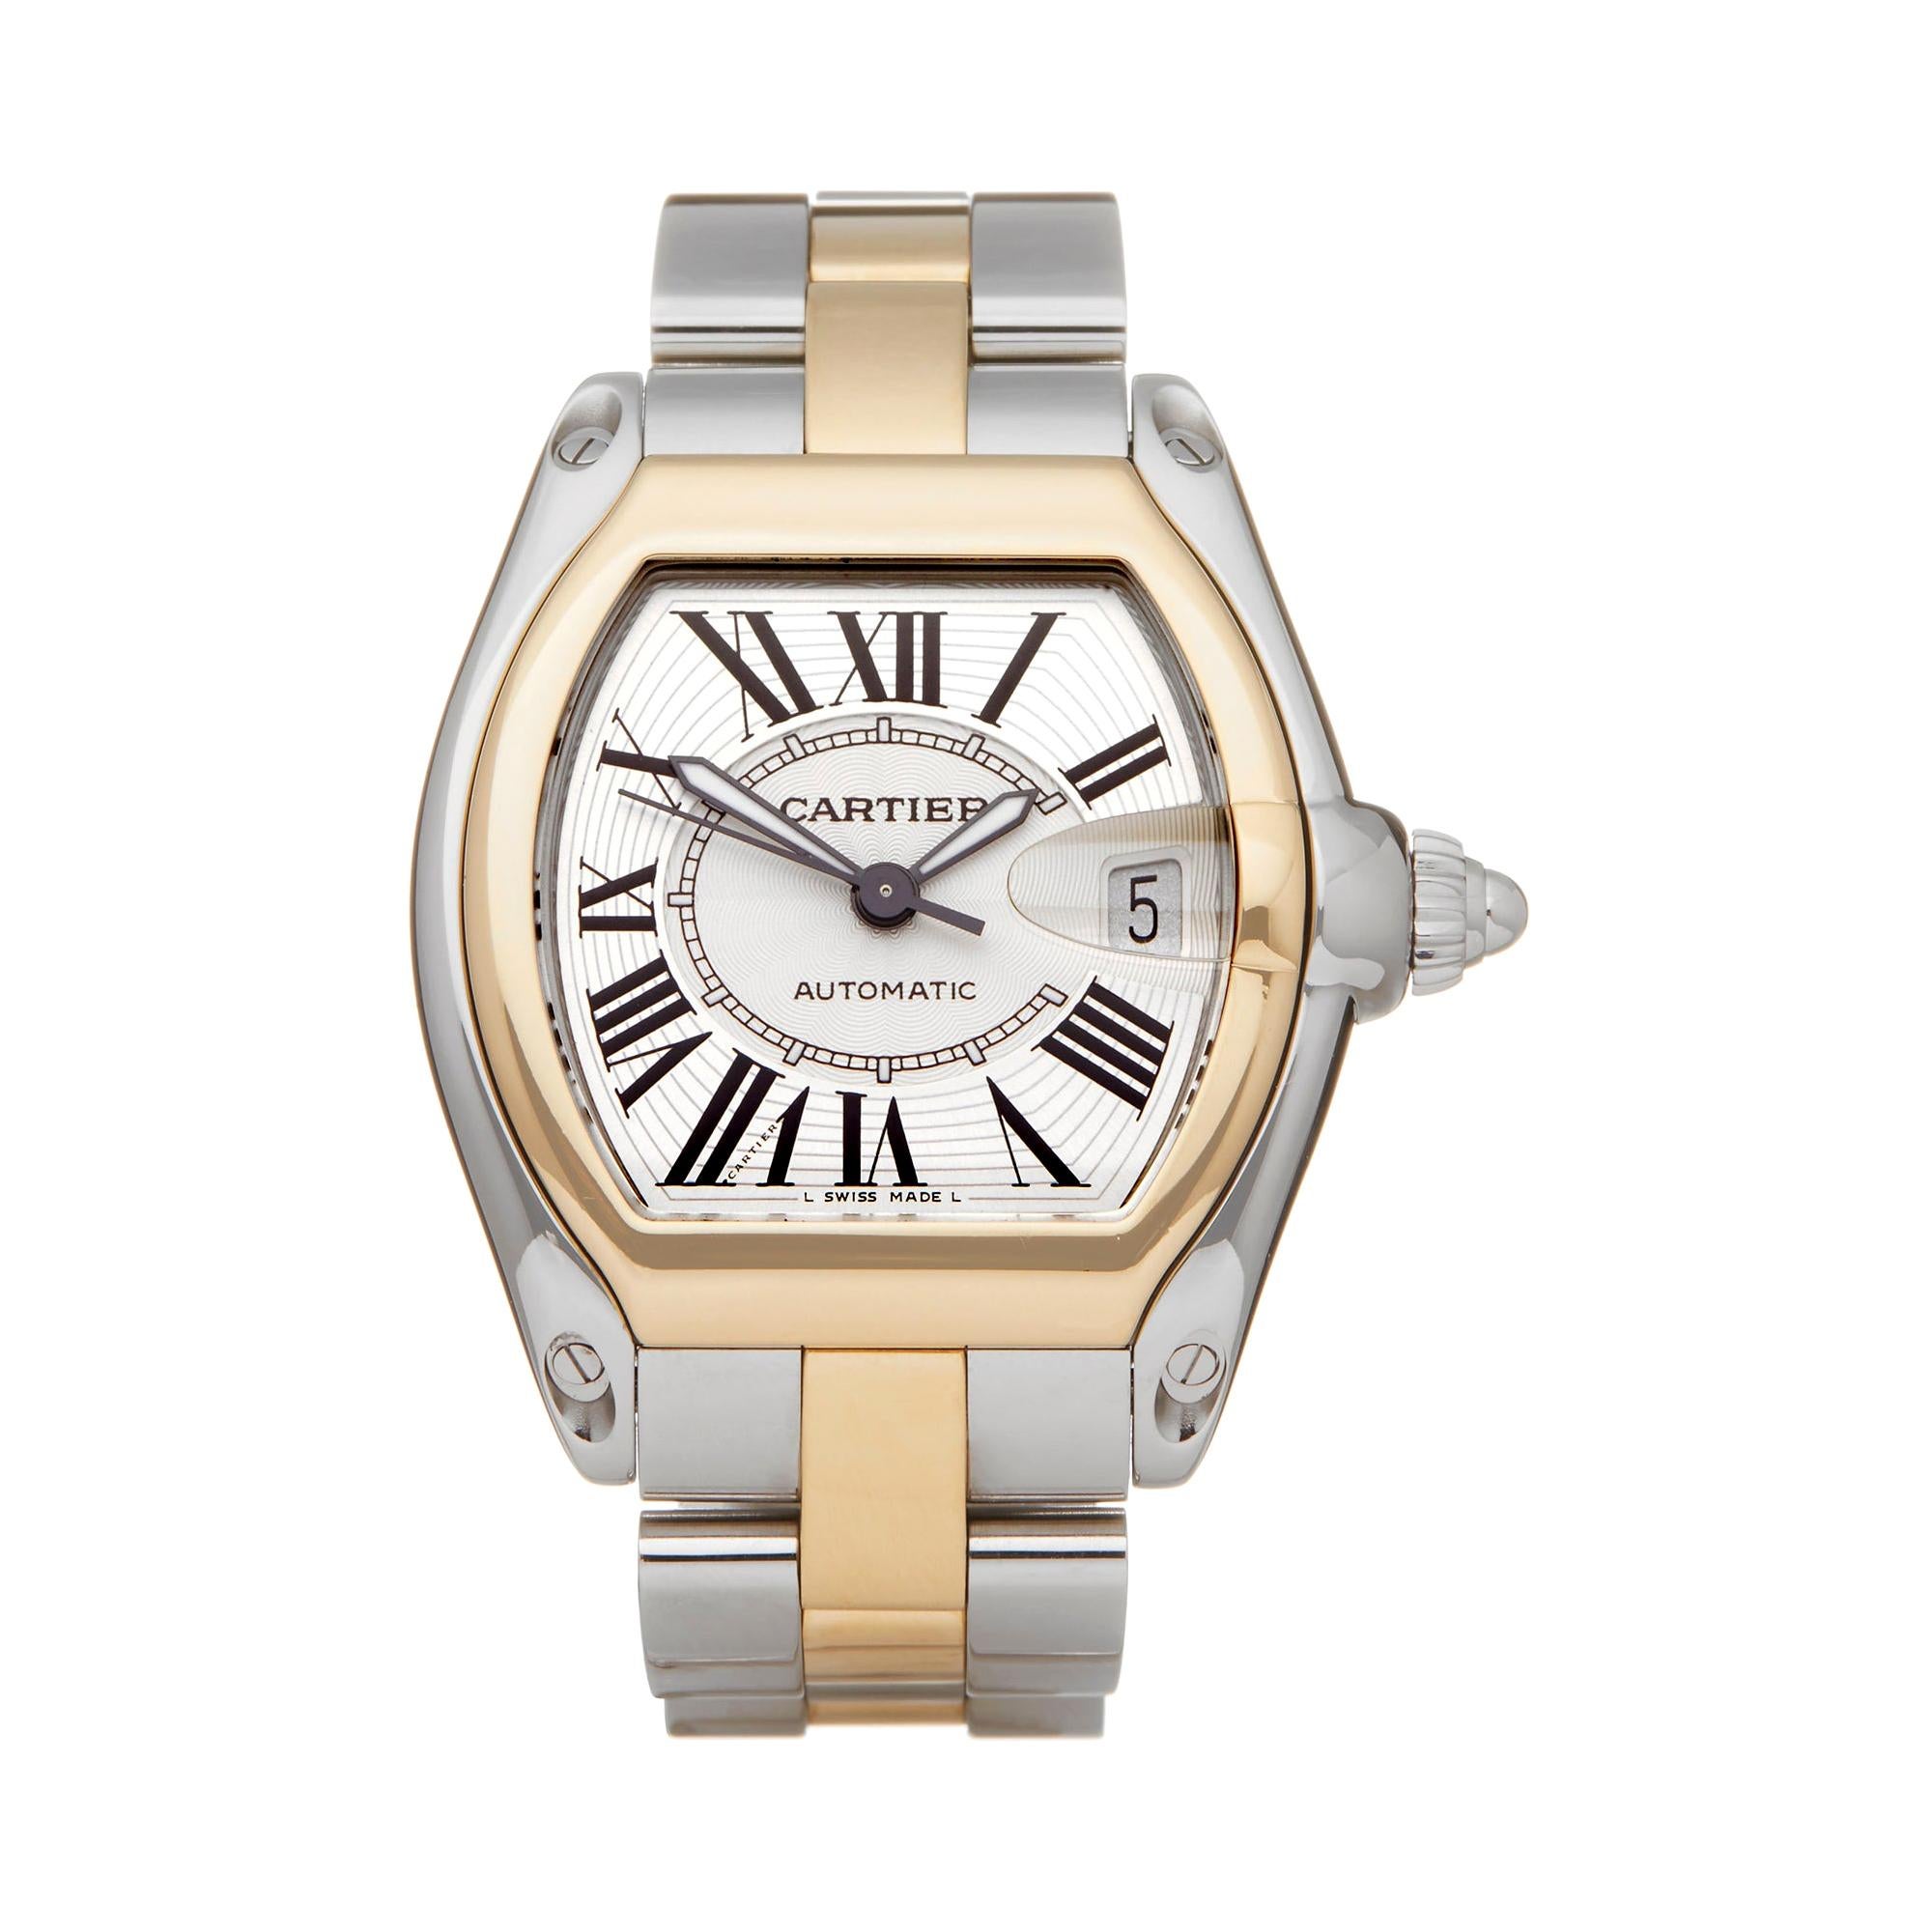 Cartier Roadster Stainless Steel and Yellow Gold 2510 or W62031Y4 Wristwatch